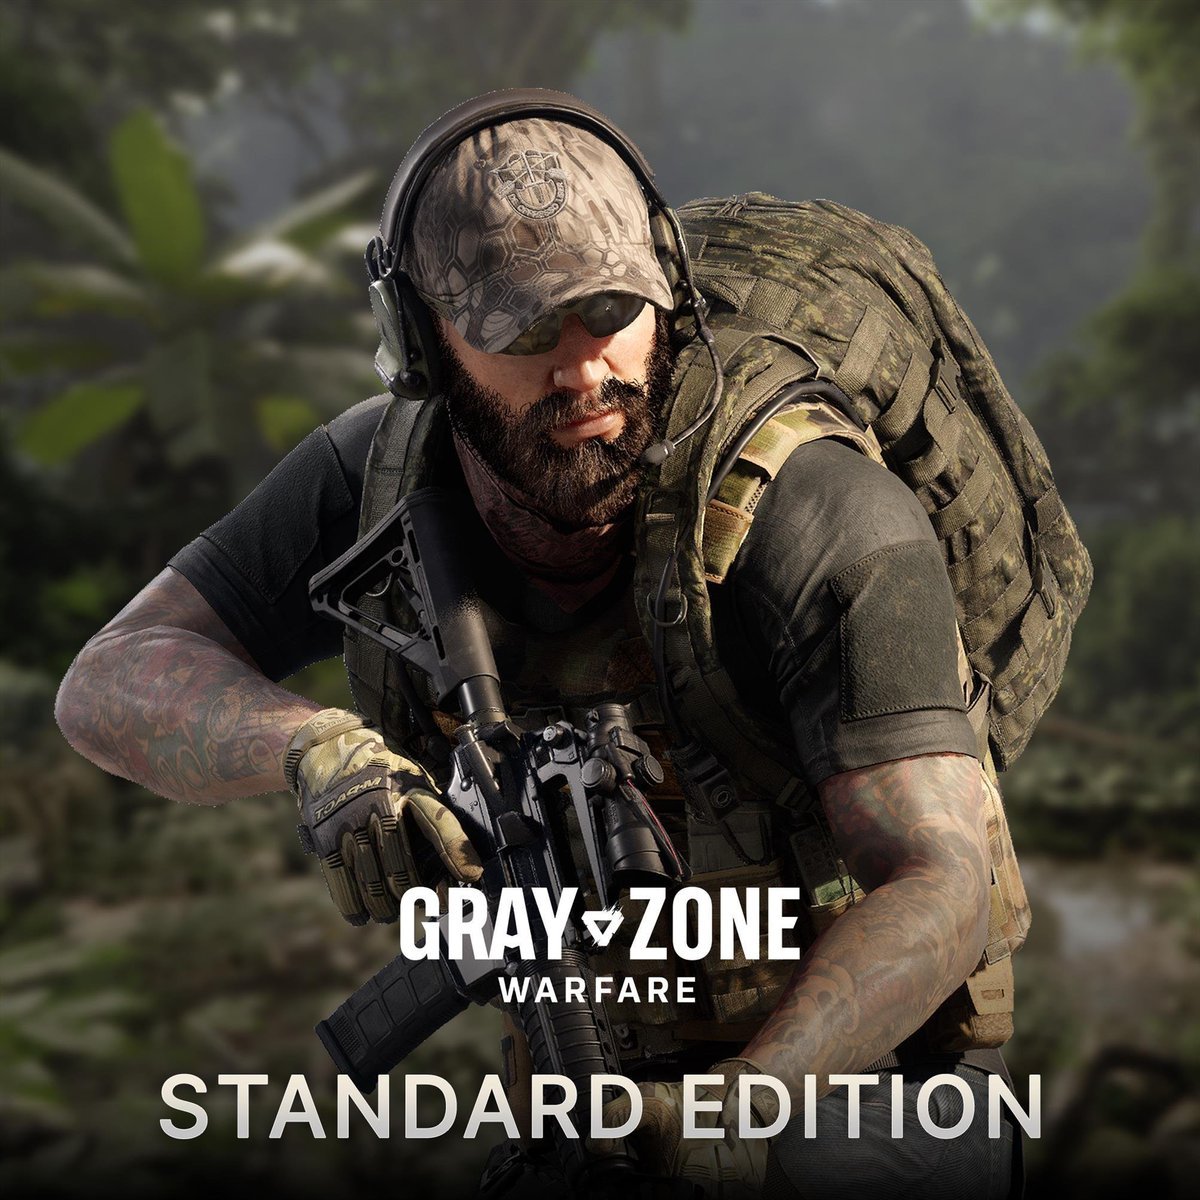 ‼️ #GZW Standard Edition Giveaway ‼️

PaintSplats is LIVE NOW giving away 4 Copies of #GrayZoneWarfare! 

To Enter: 

1⃣ Like & Retweet
2⃣ TAG @ 1 Person
3⃣ Must Follow 👉 twitch.tv/paintsplats

🏆 All 4 Winners to be selected LIVE during the Stream!